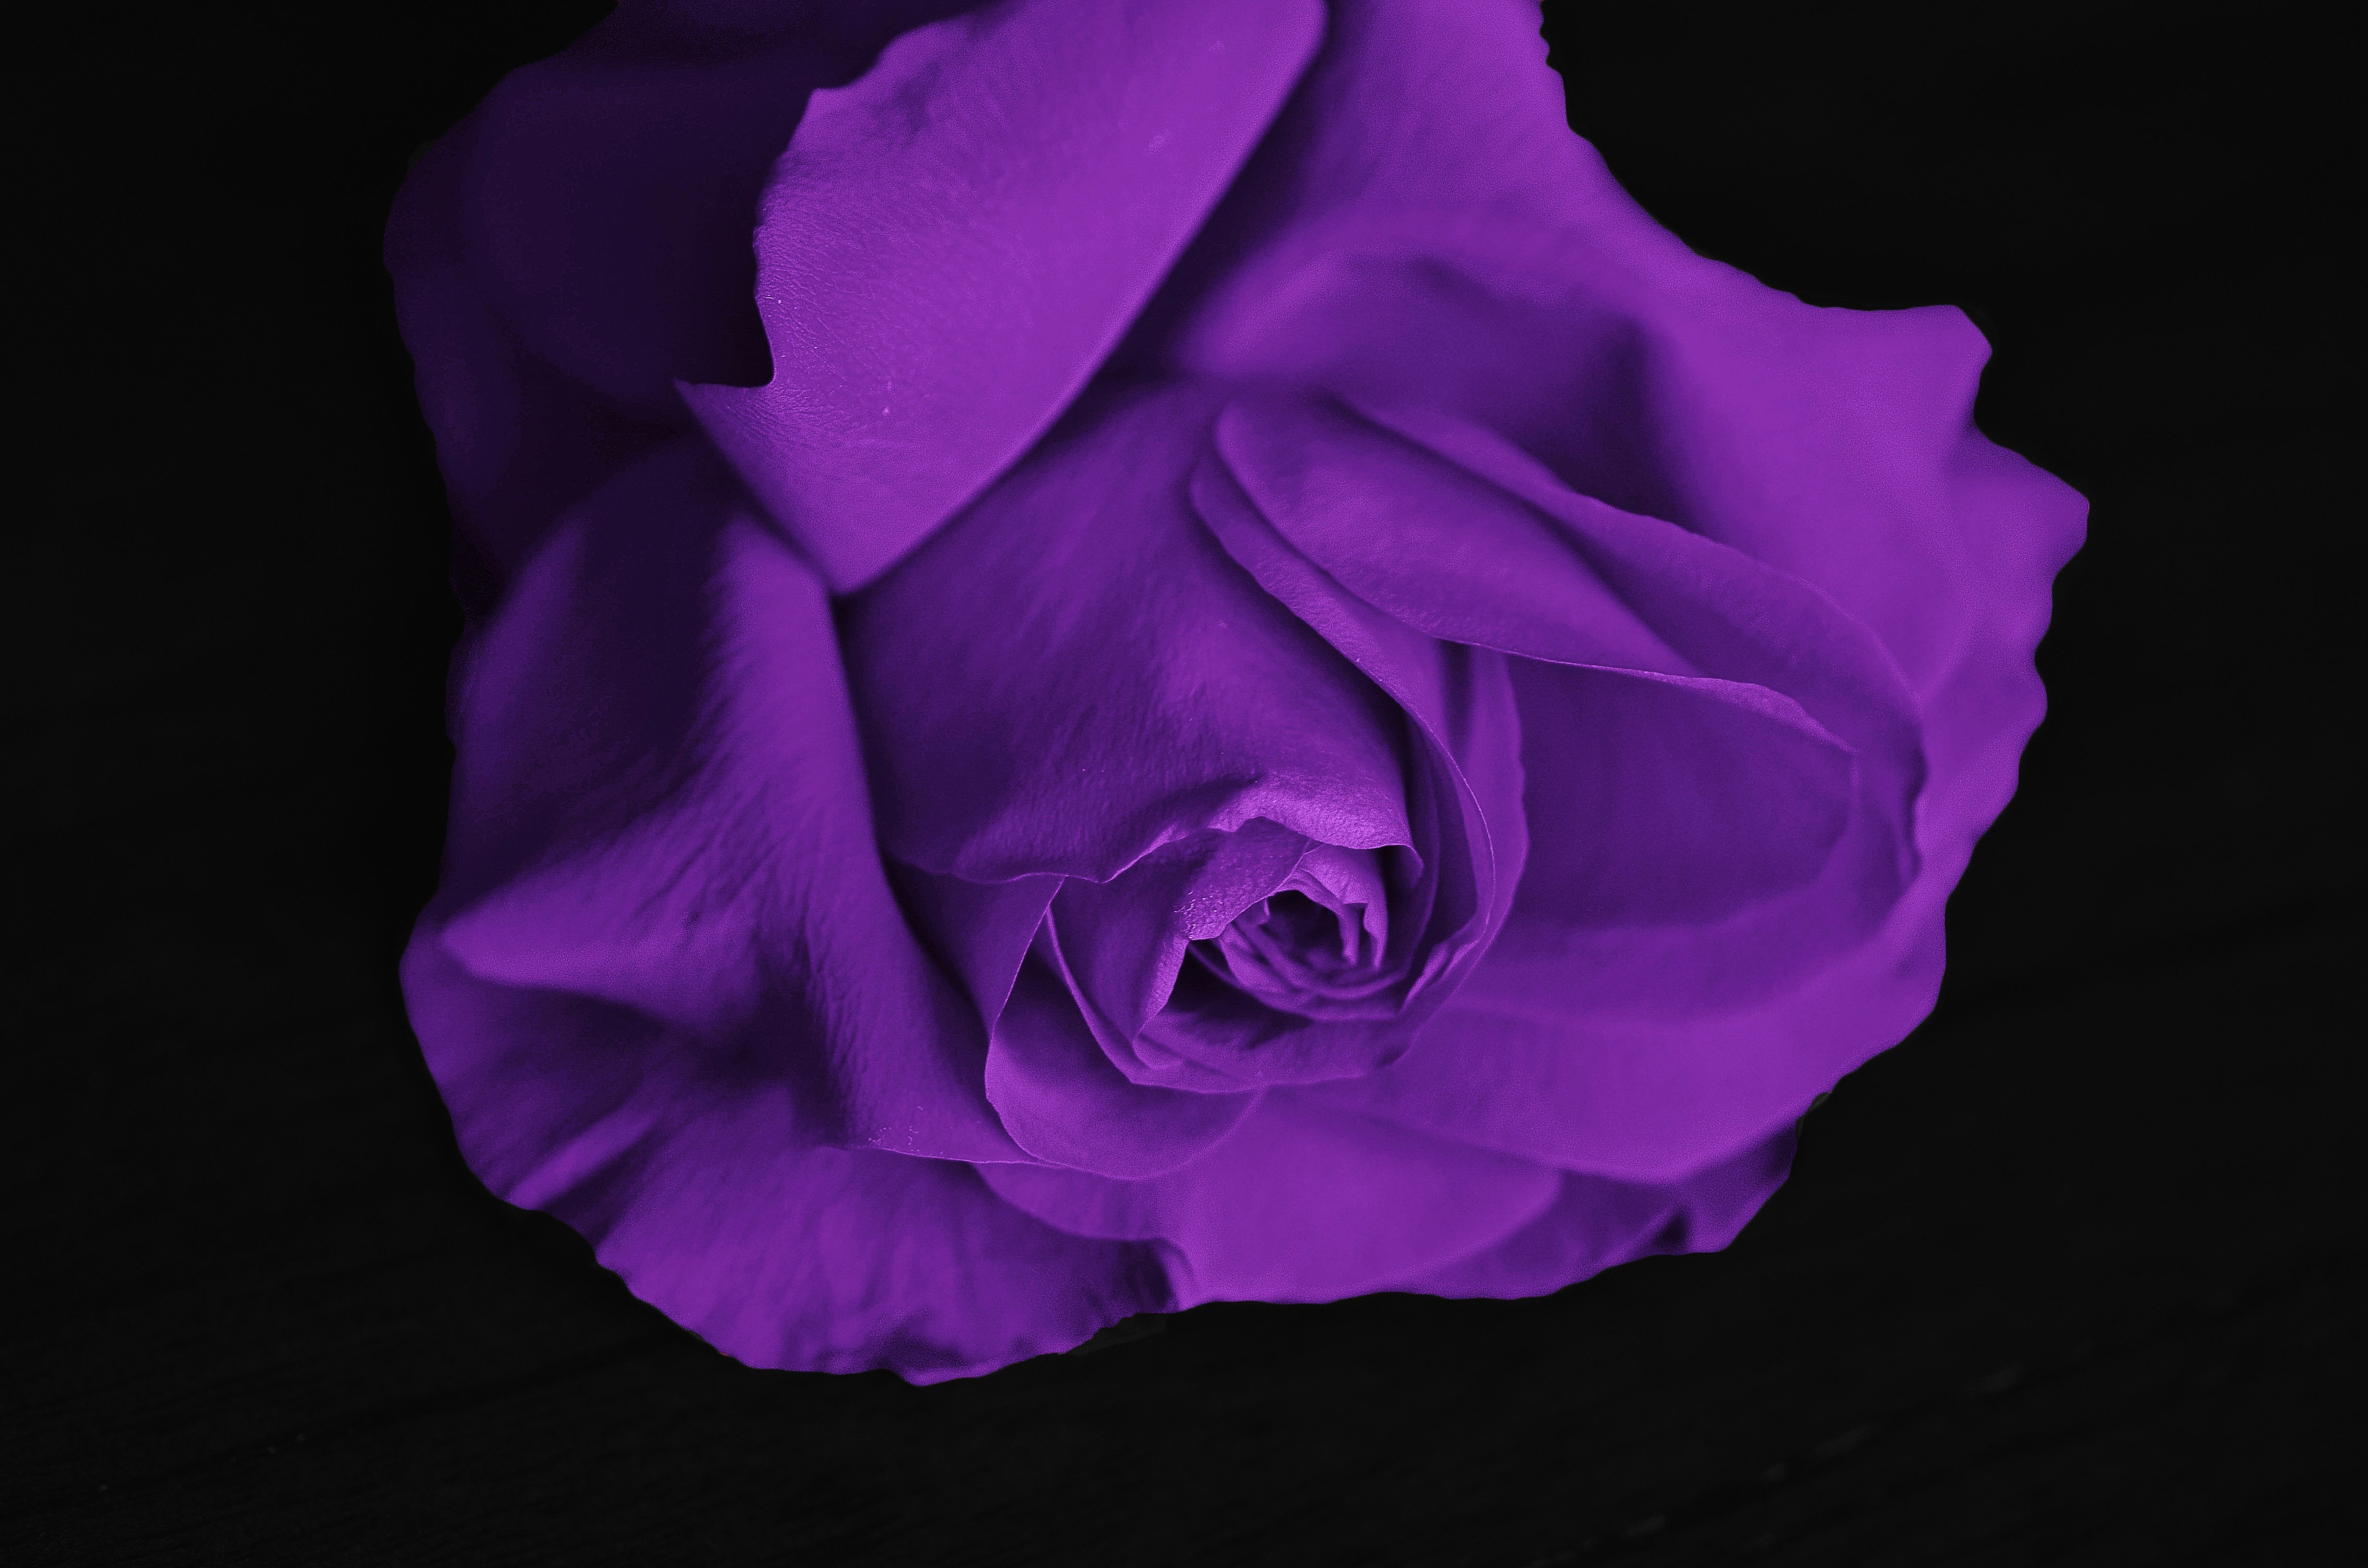 110364 download wallpaper rose flower, flowers, violet, rose, petals, bud, purple screensavers and pictures for free